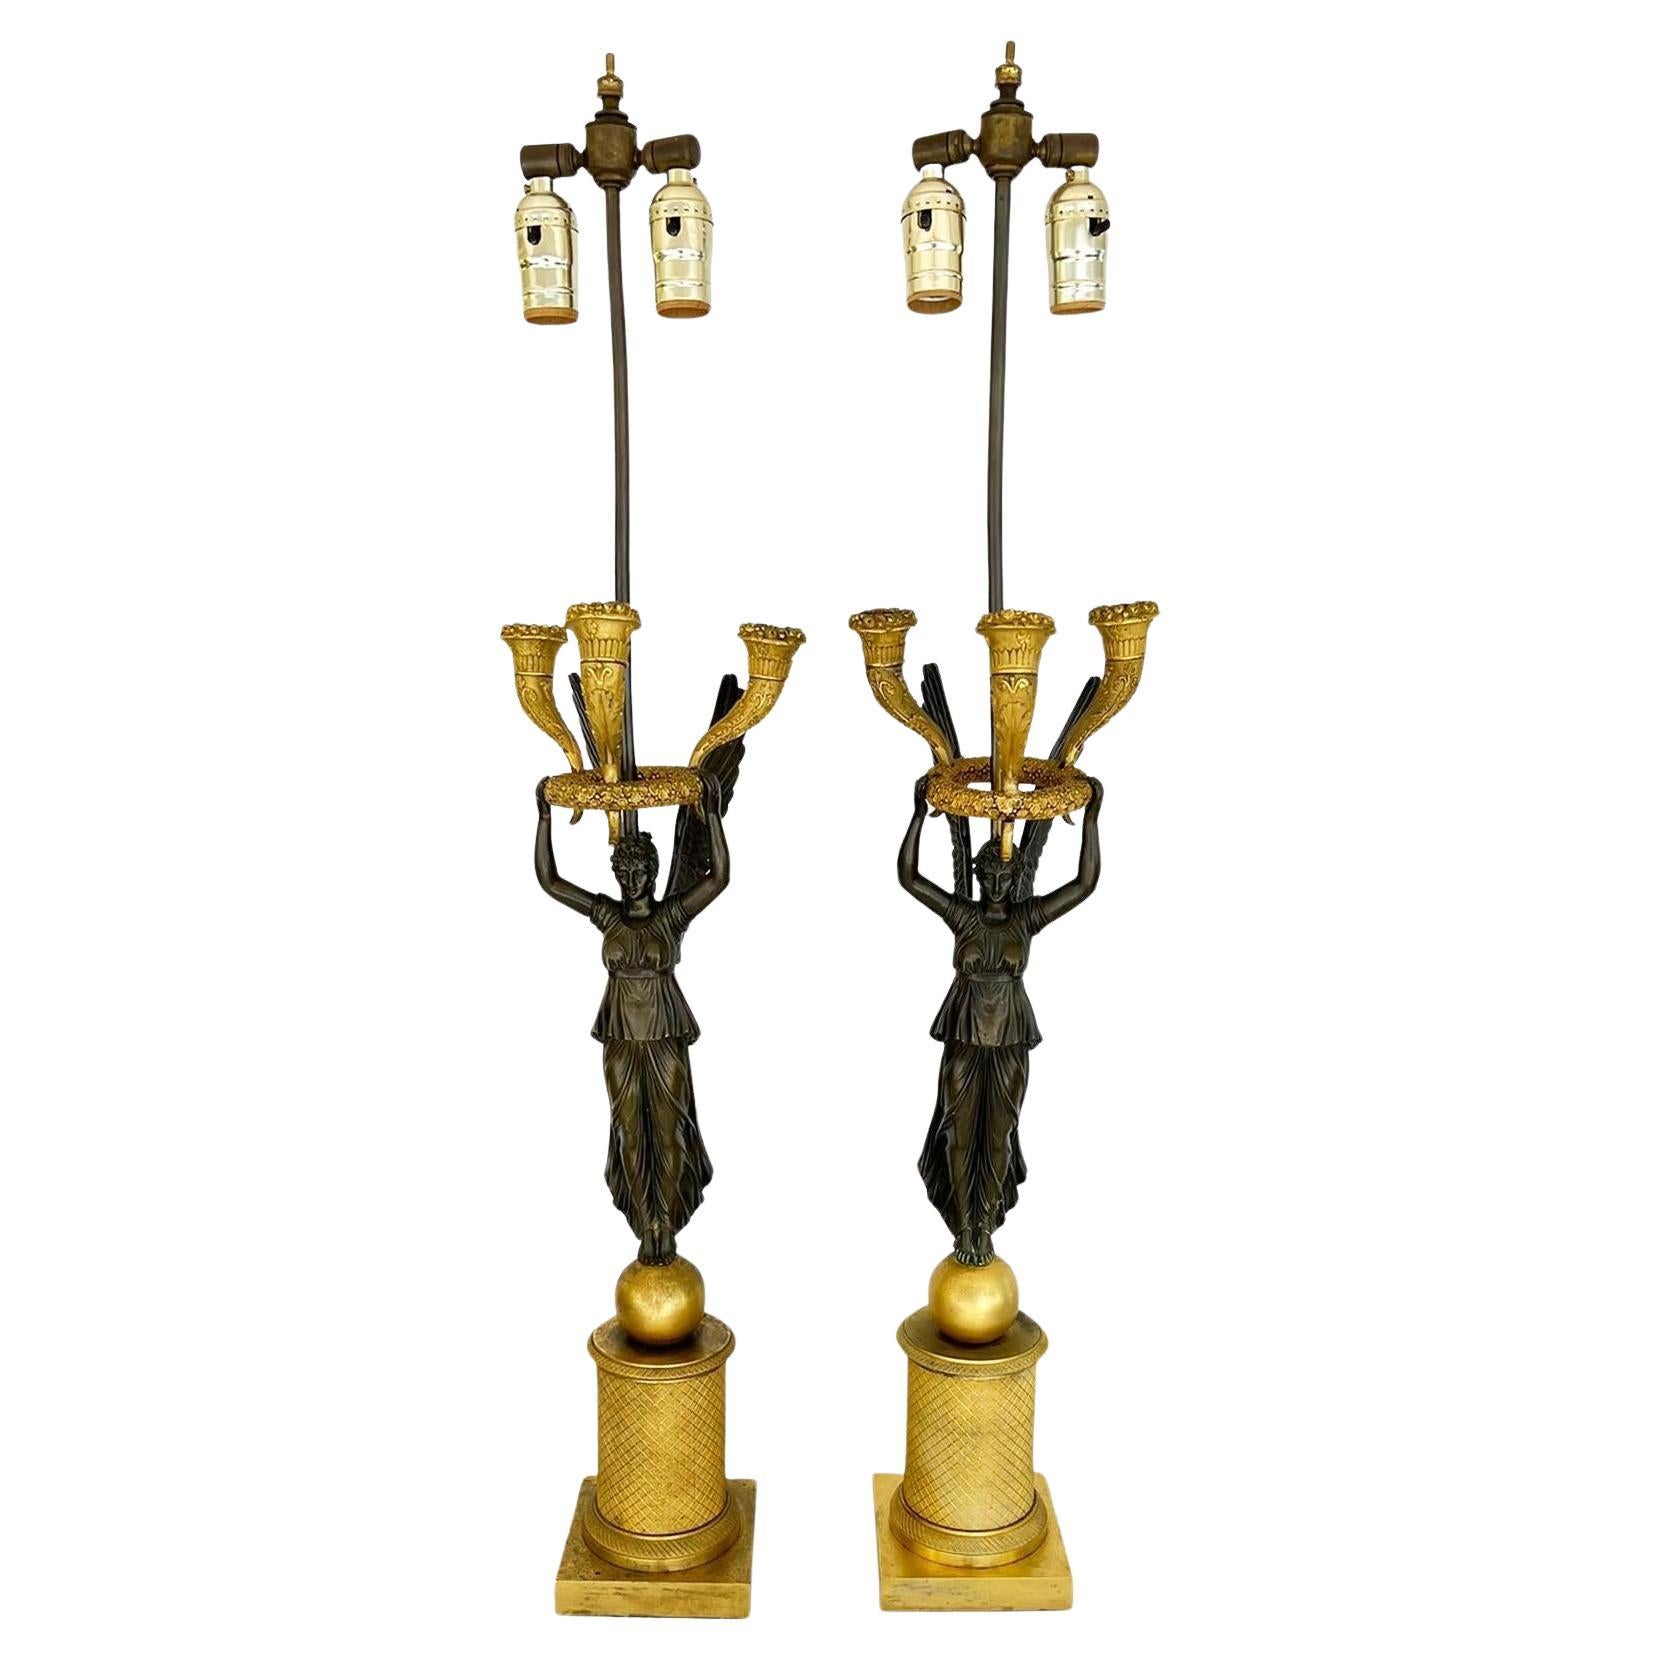 Pair of Late Empire Ormolu and Patented Bronze Figural Candelabra Lamps, C. 1815